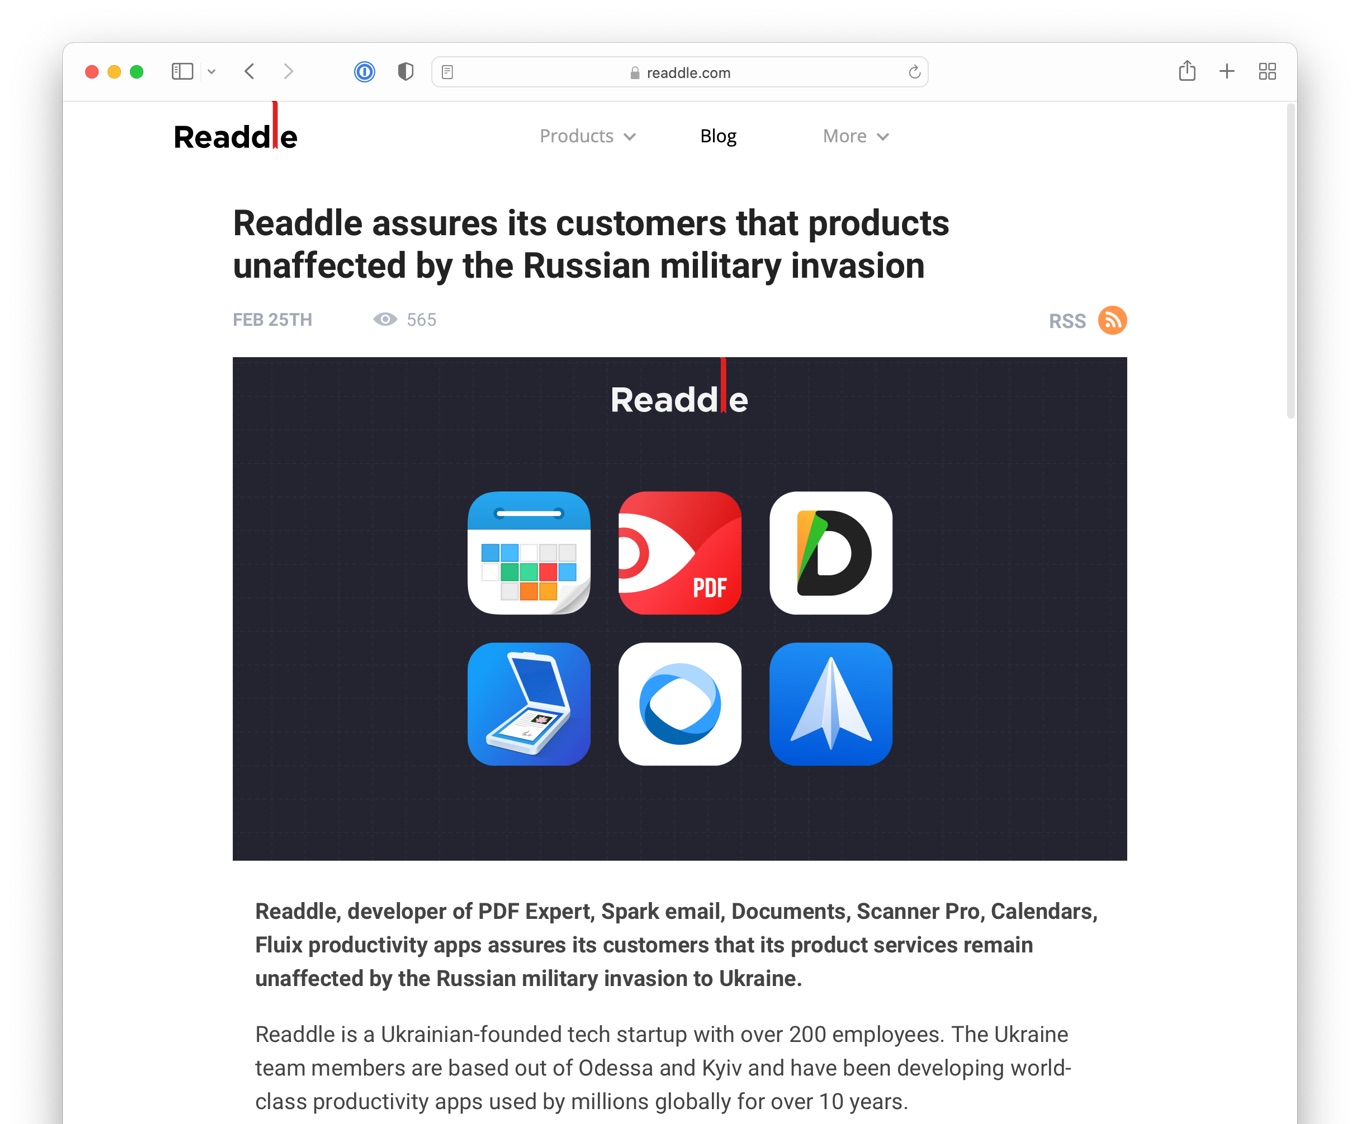 Readdle assures its customers that products unaffected by the Russian military invasion